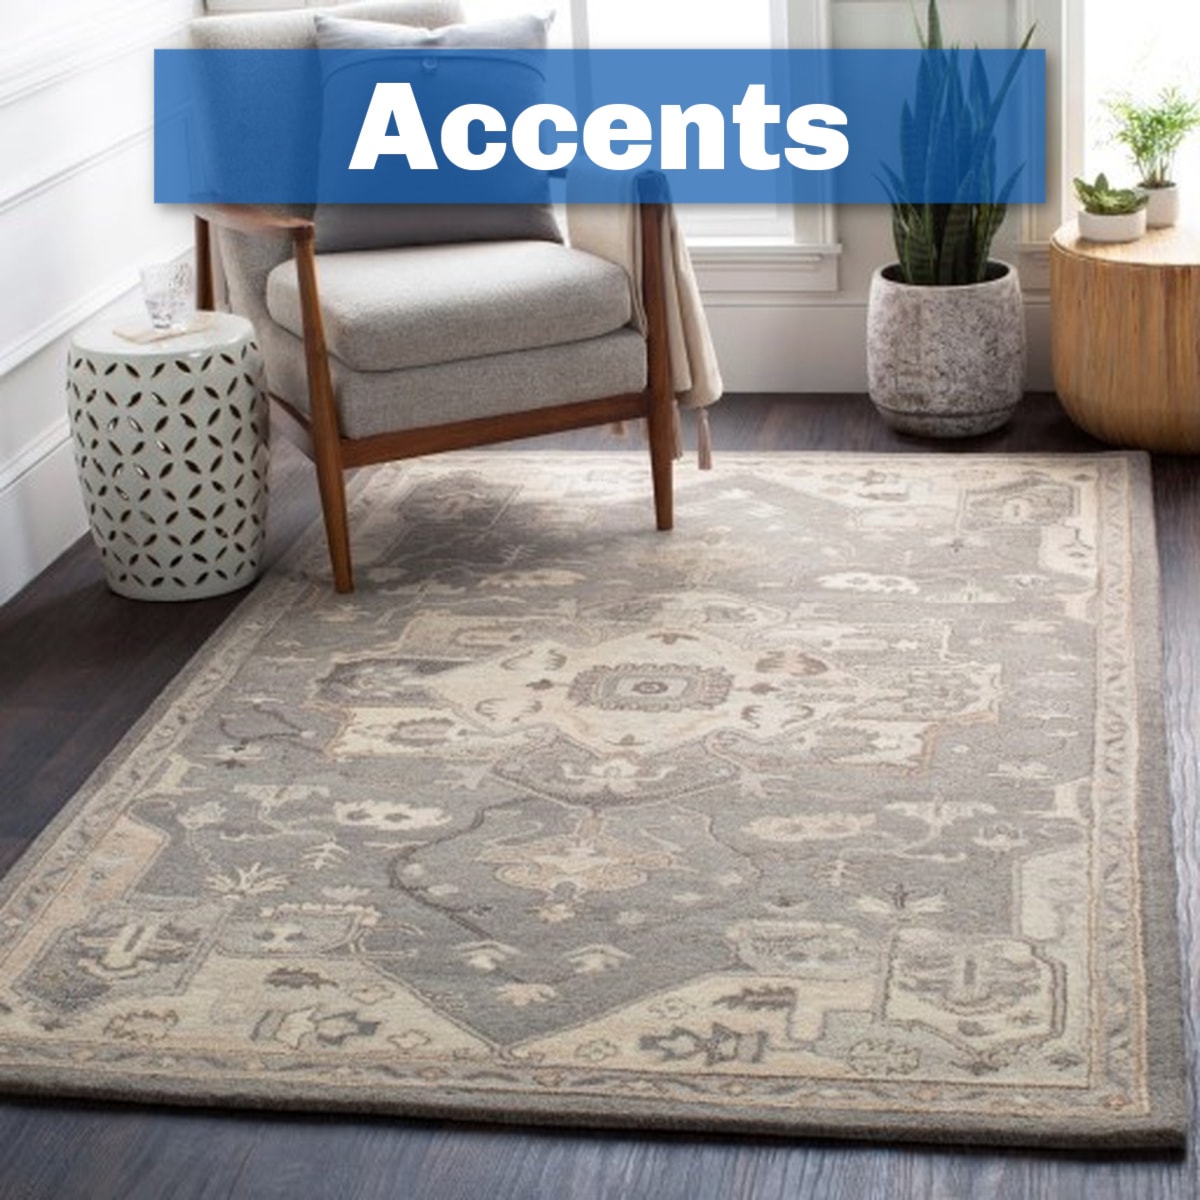 accents image